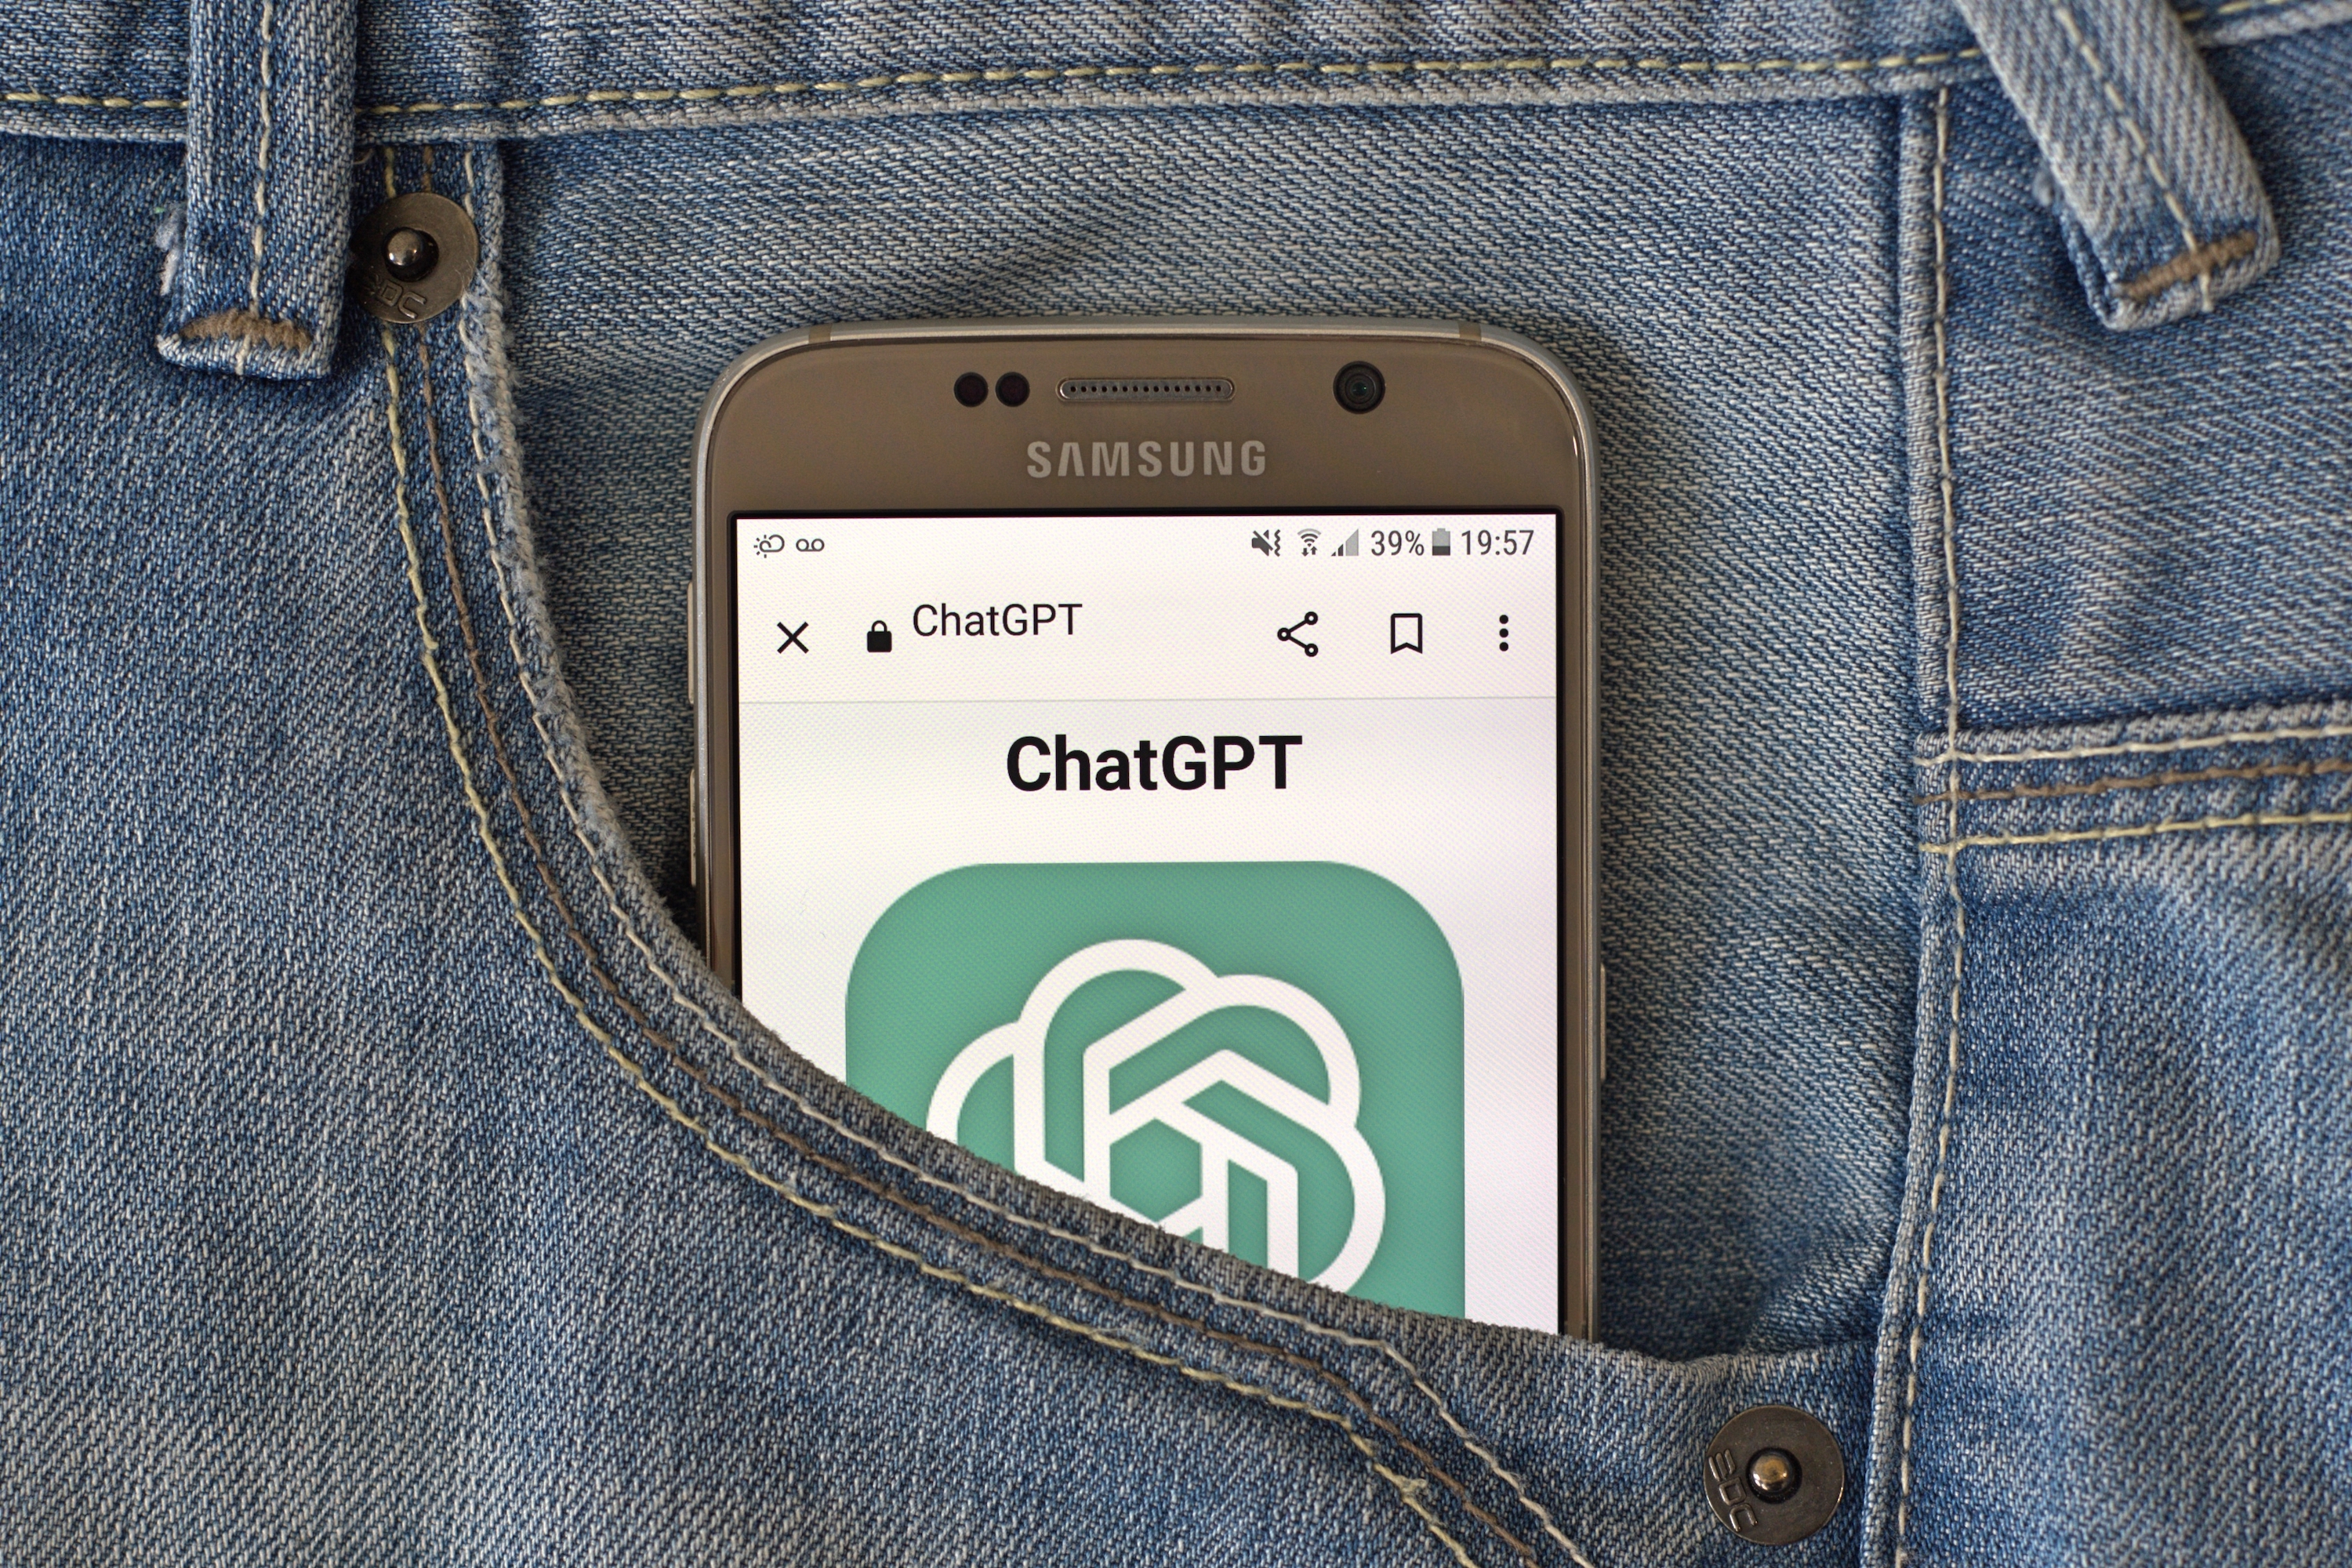 ChatGPT Android App Available In The Google Play Store